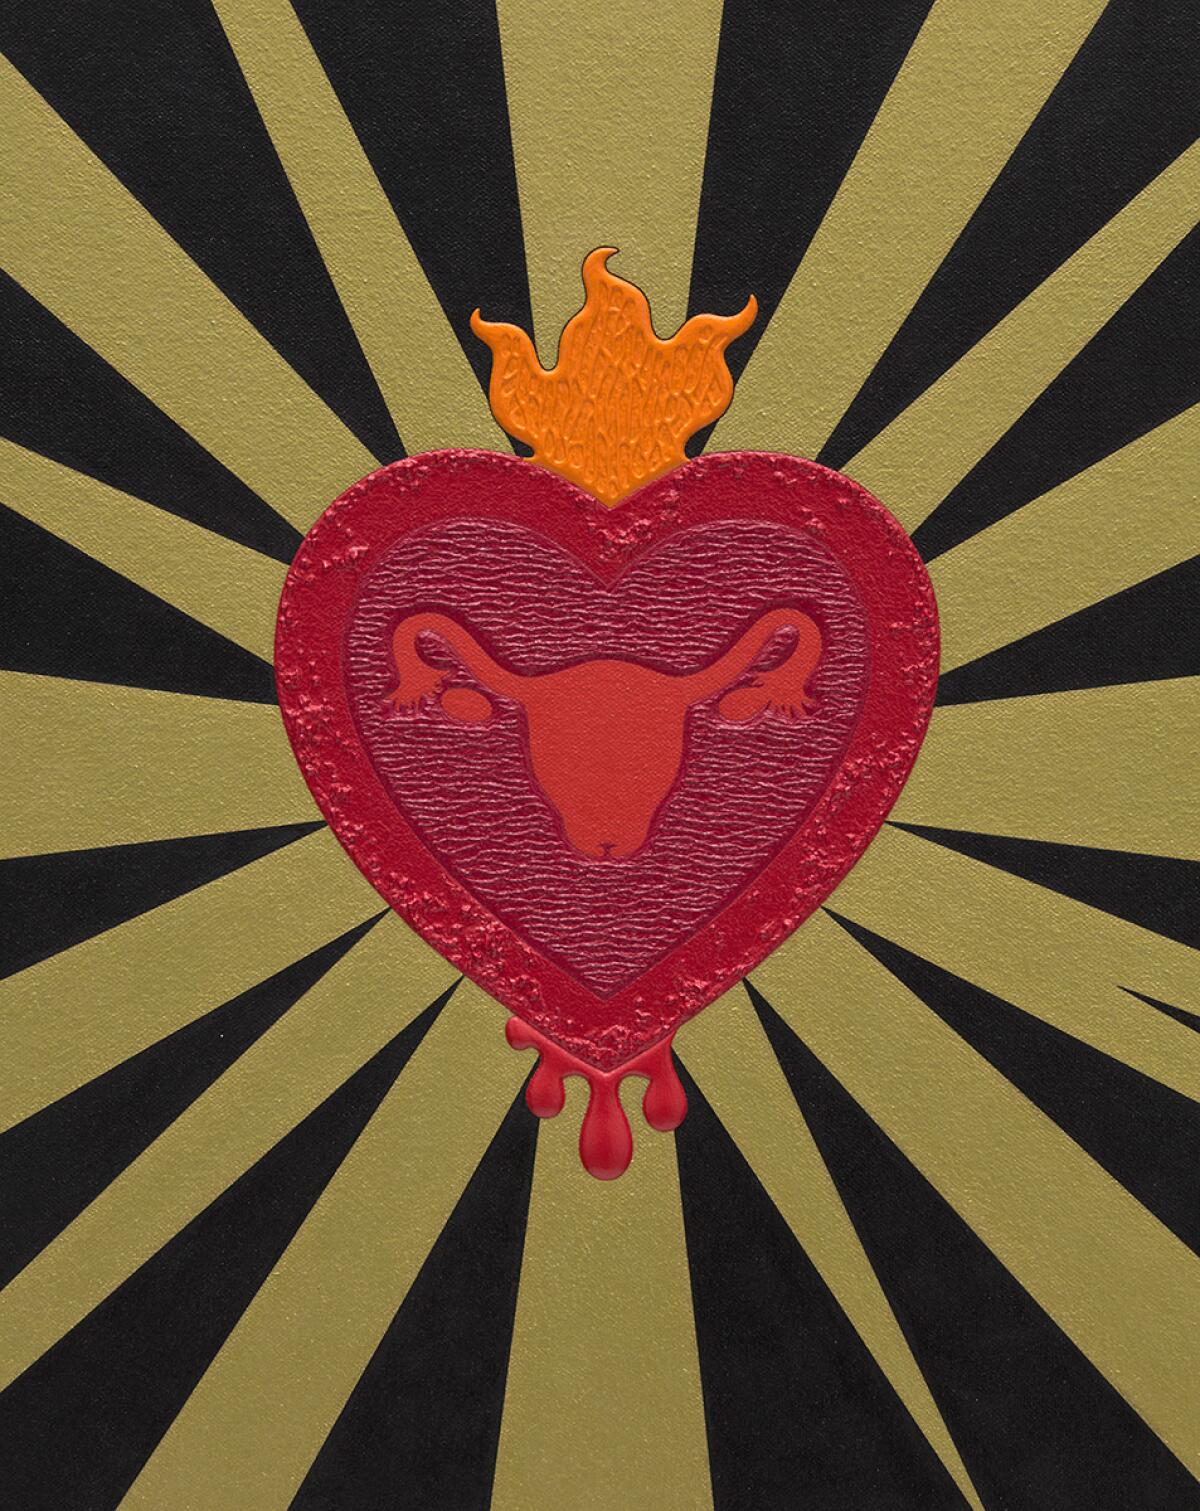 A textured painting in black, gold and red shows an image of a Sacred Heart with an endometrium within